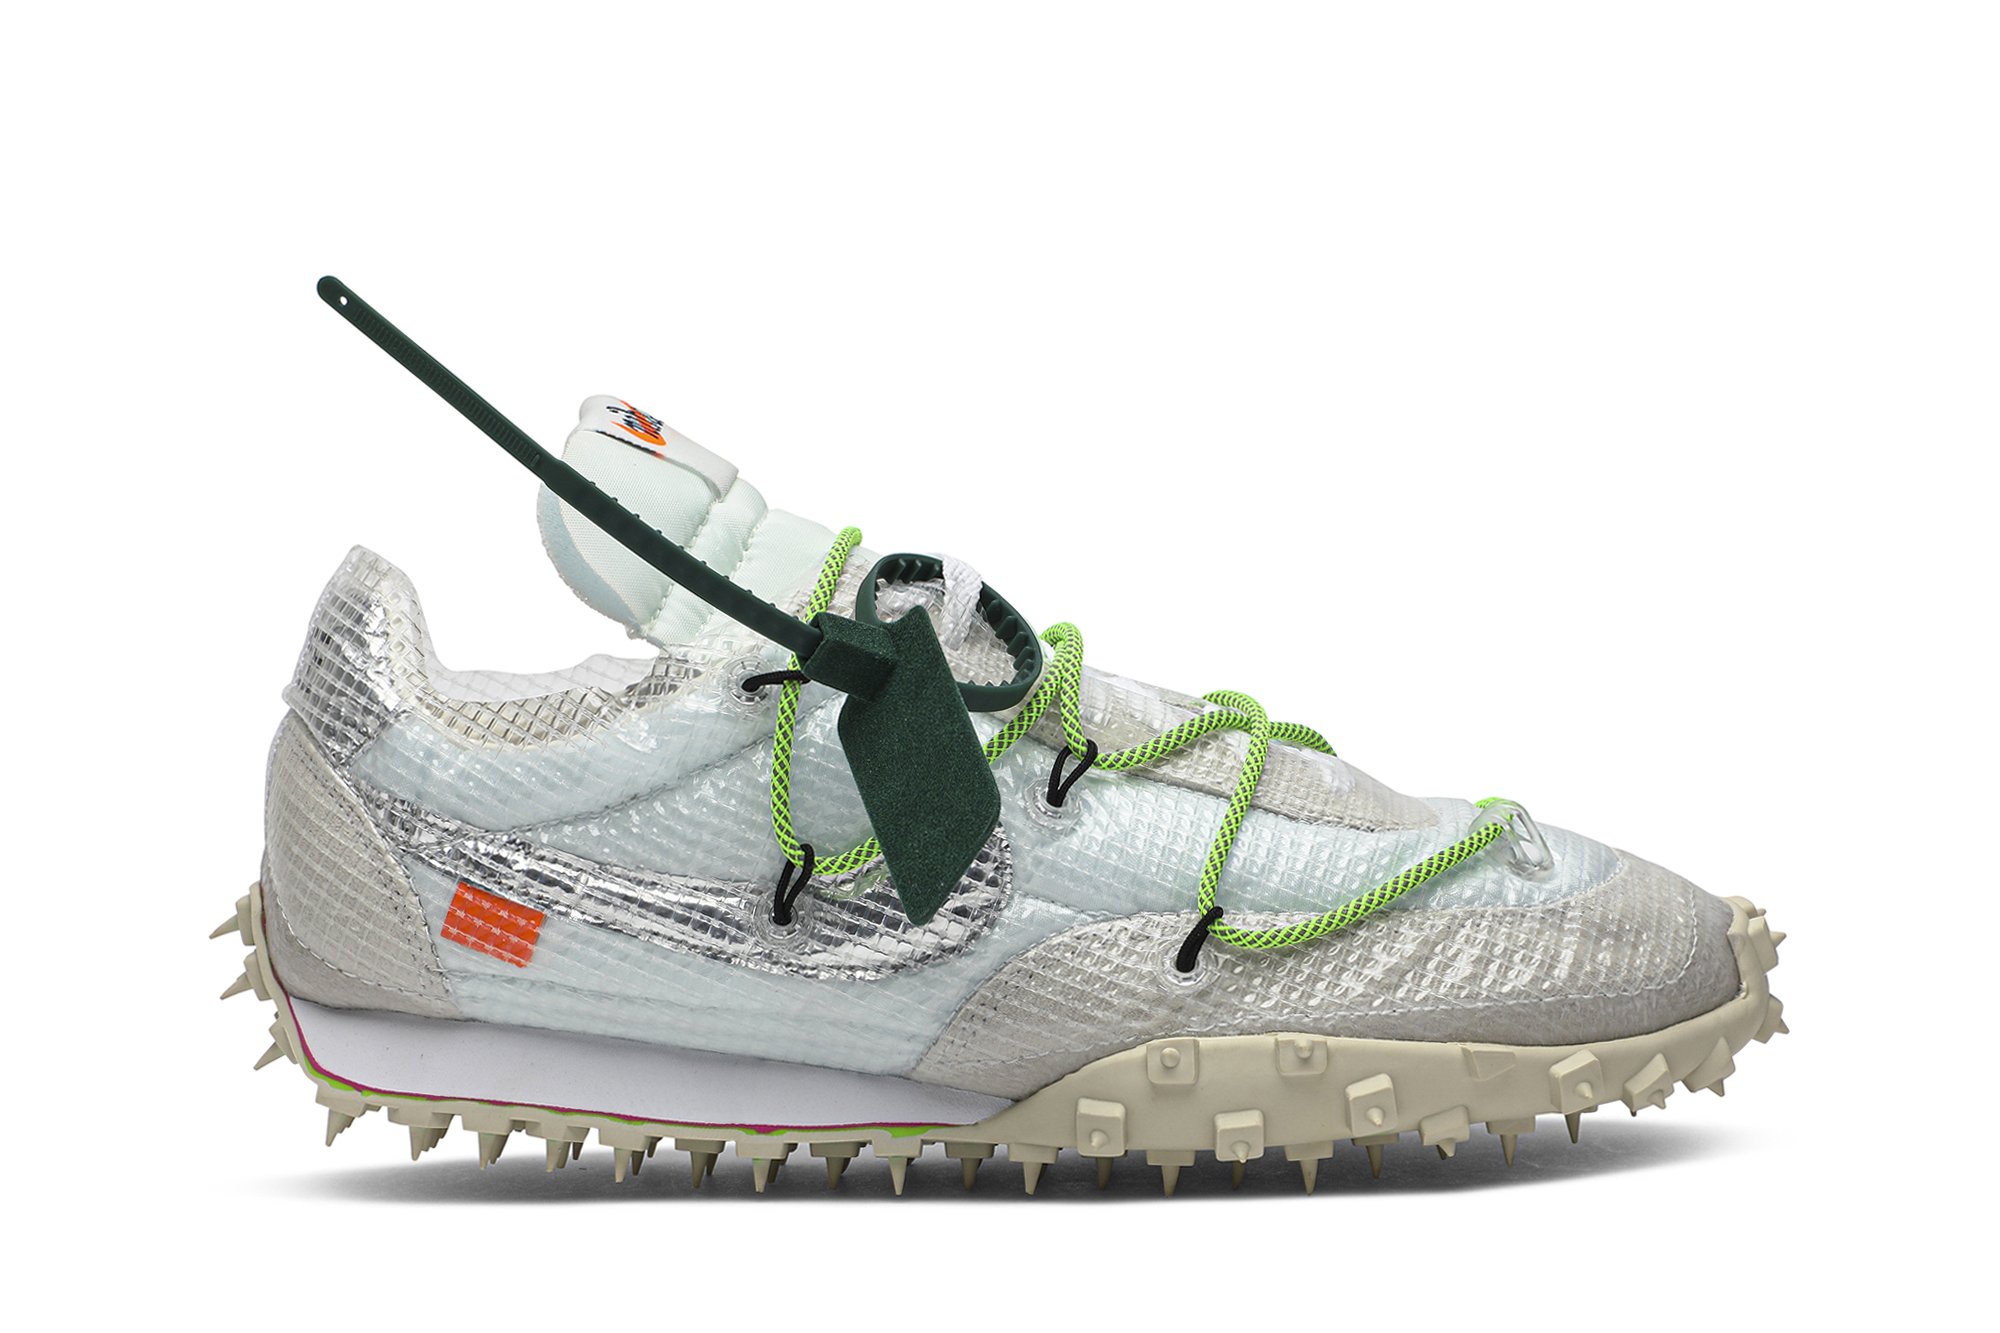 Buy Off-White x Wmns Waffle Racer 'Electric Green' - CD8180 100 | GOAT